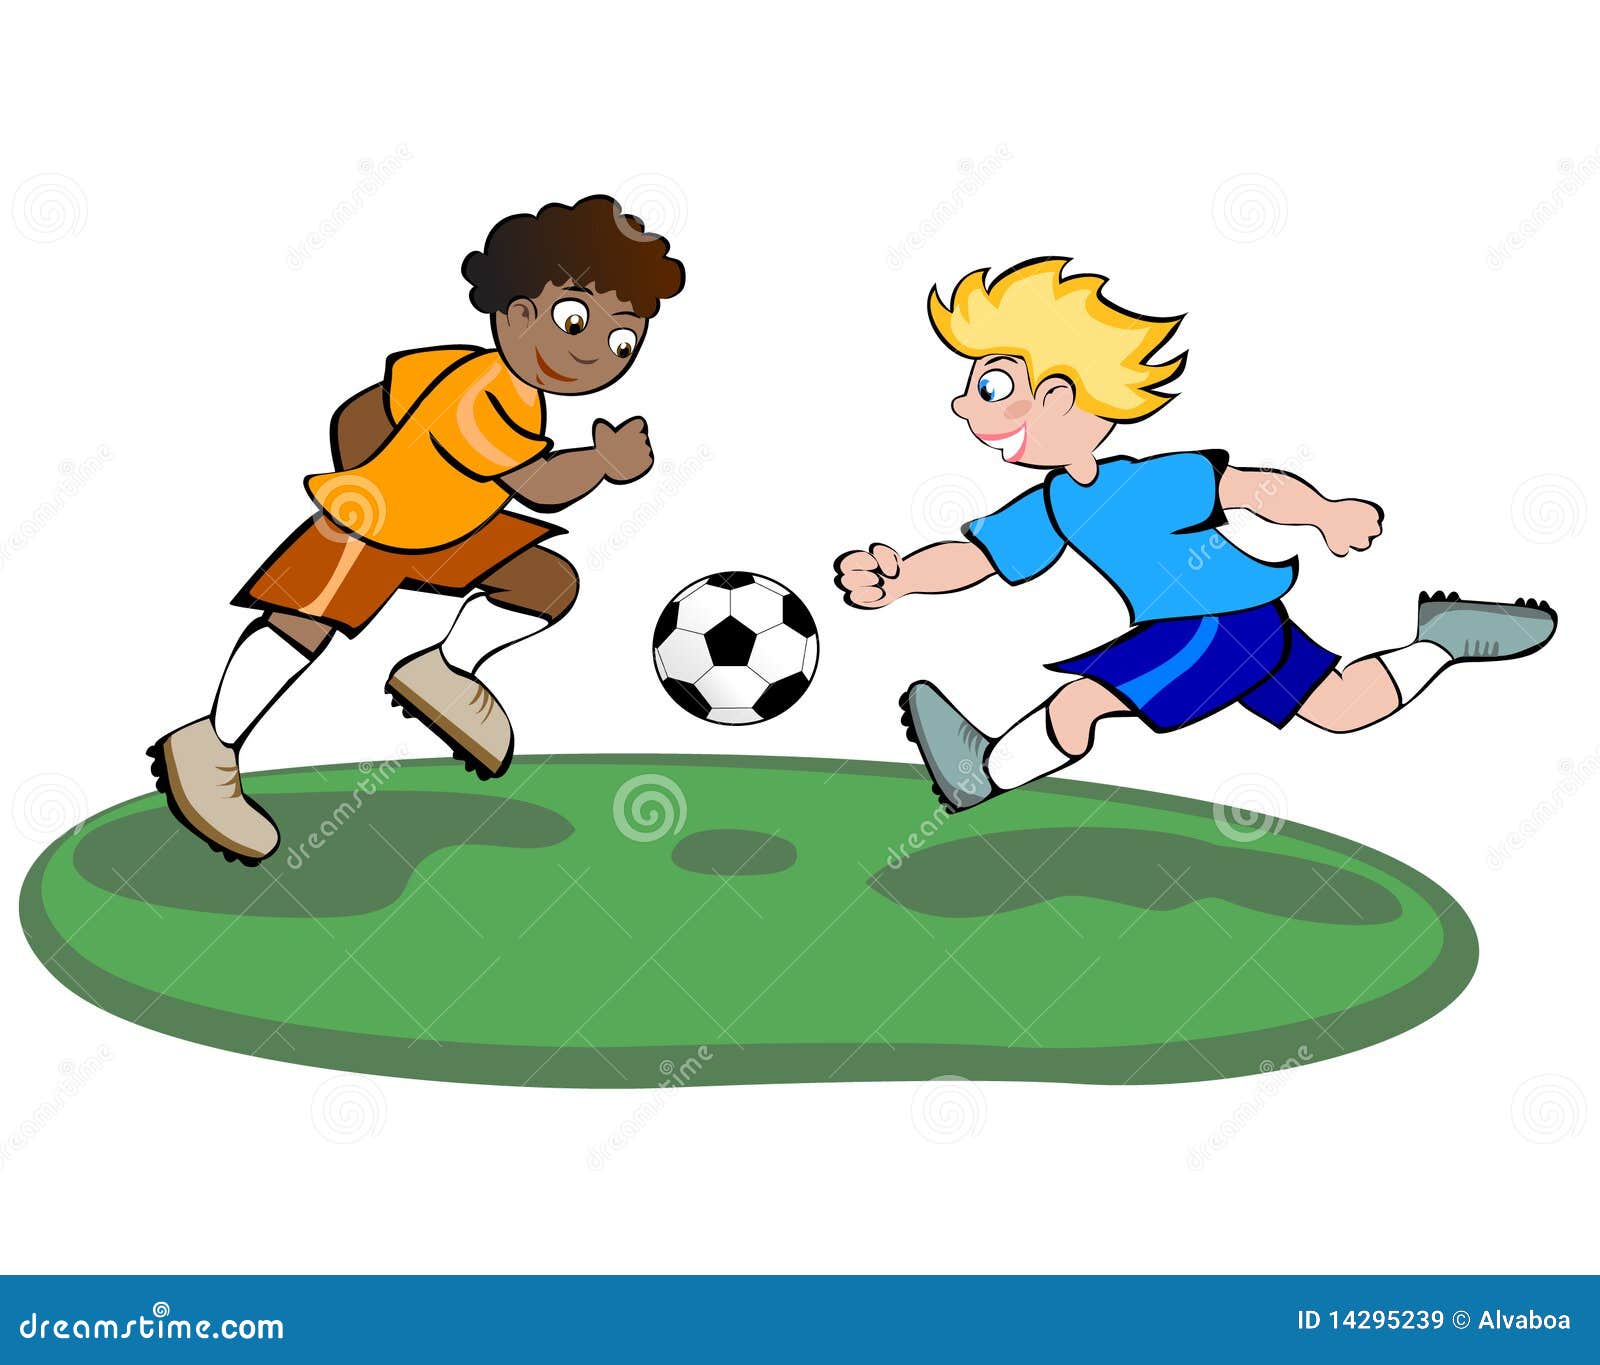 game time clipart - photo #33